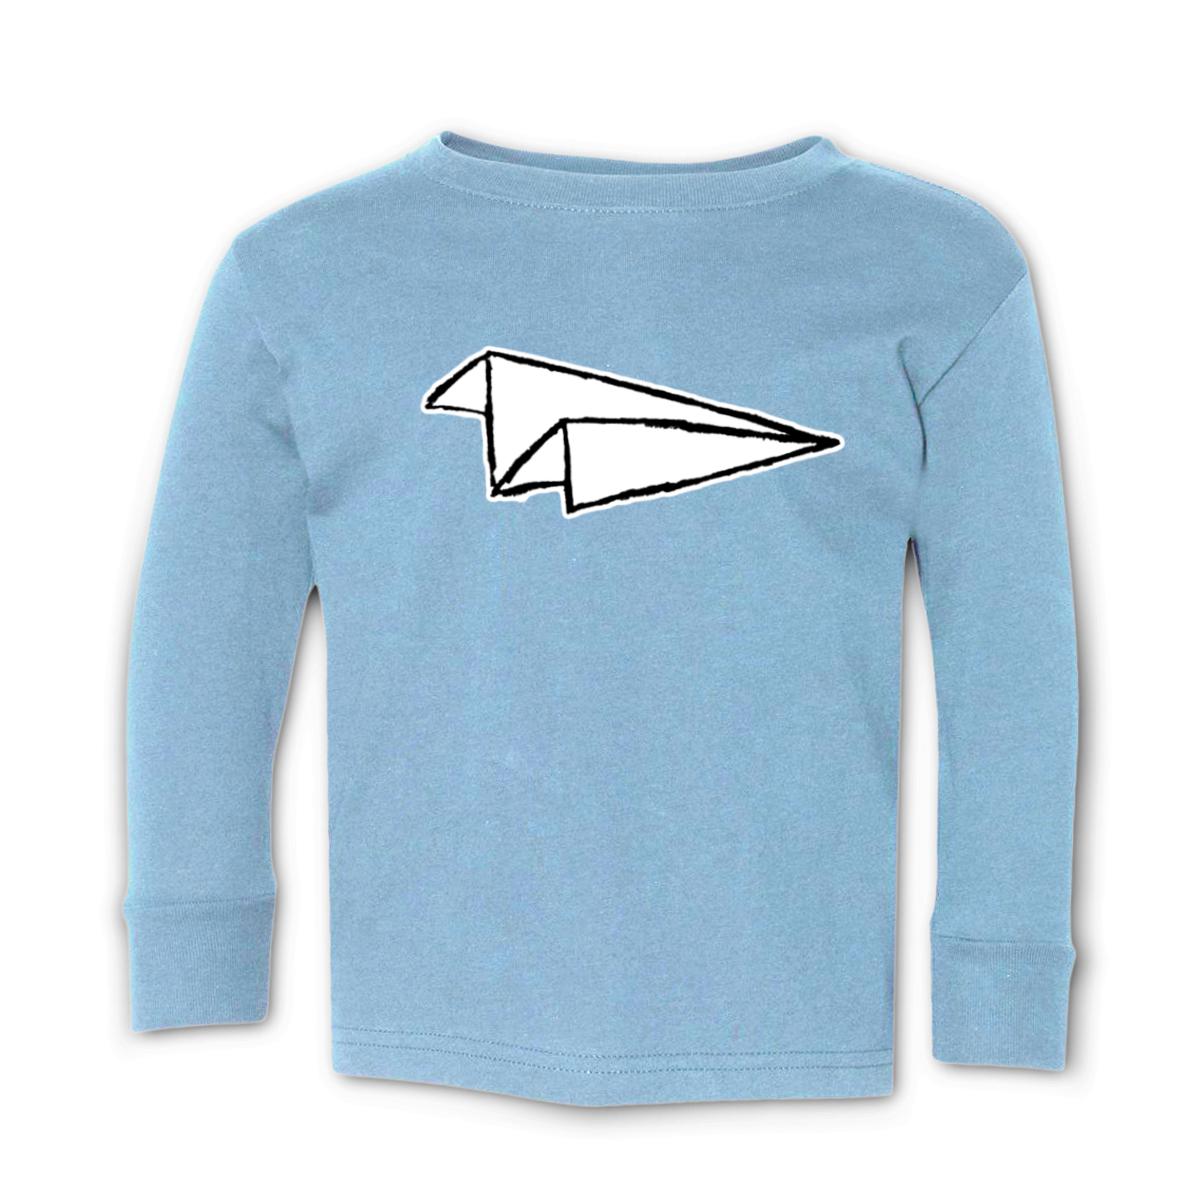 Airplane Sketch Toddler Long Sleeve Tee 4T light-blue